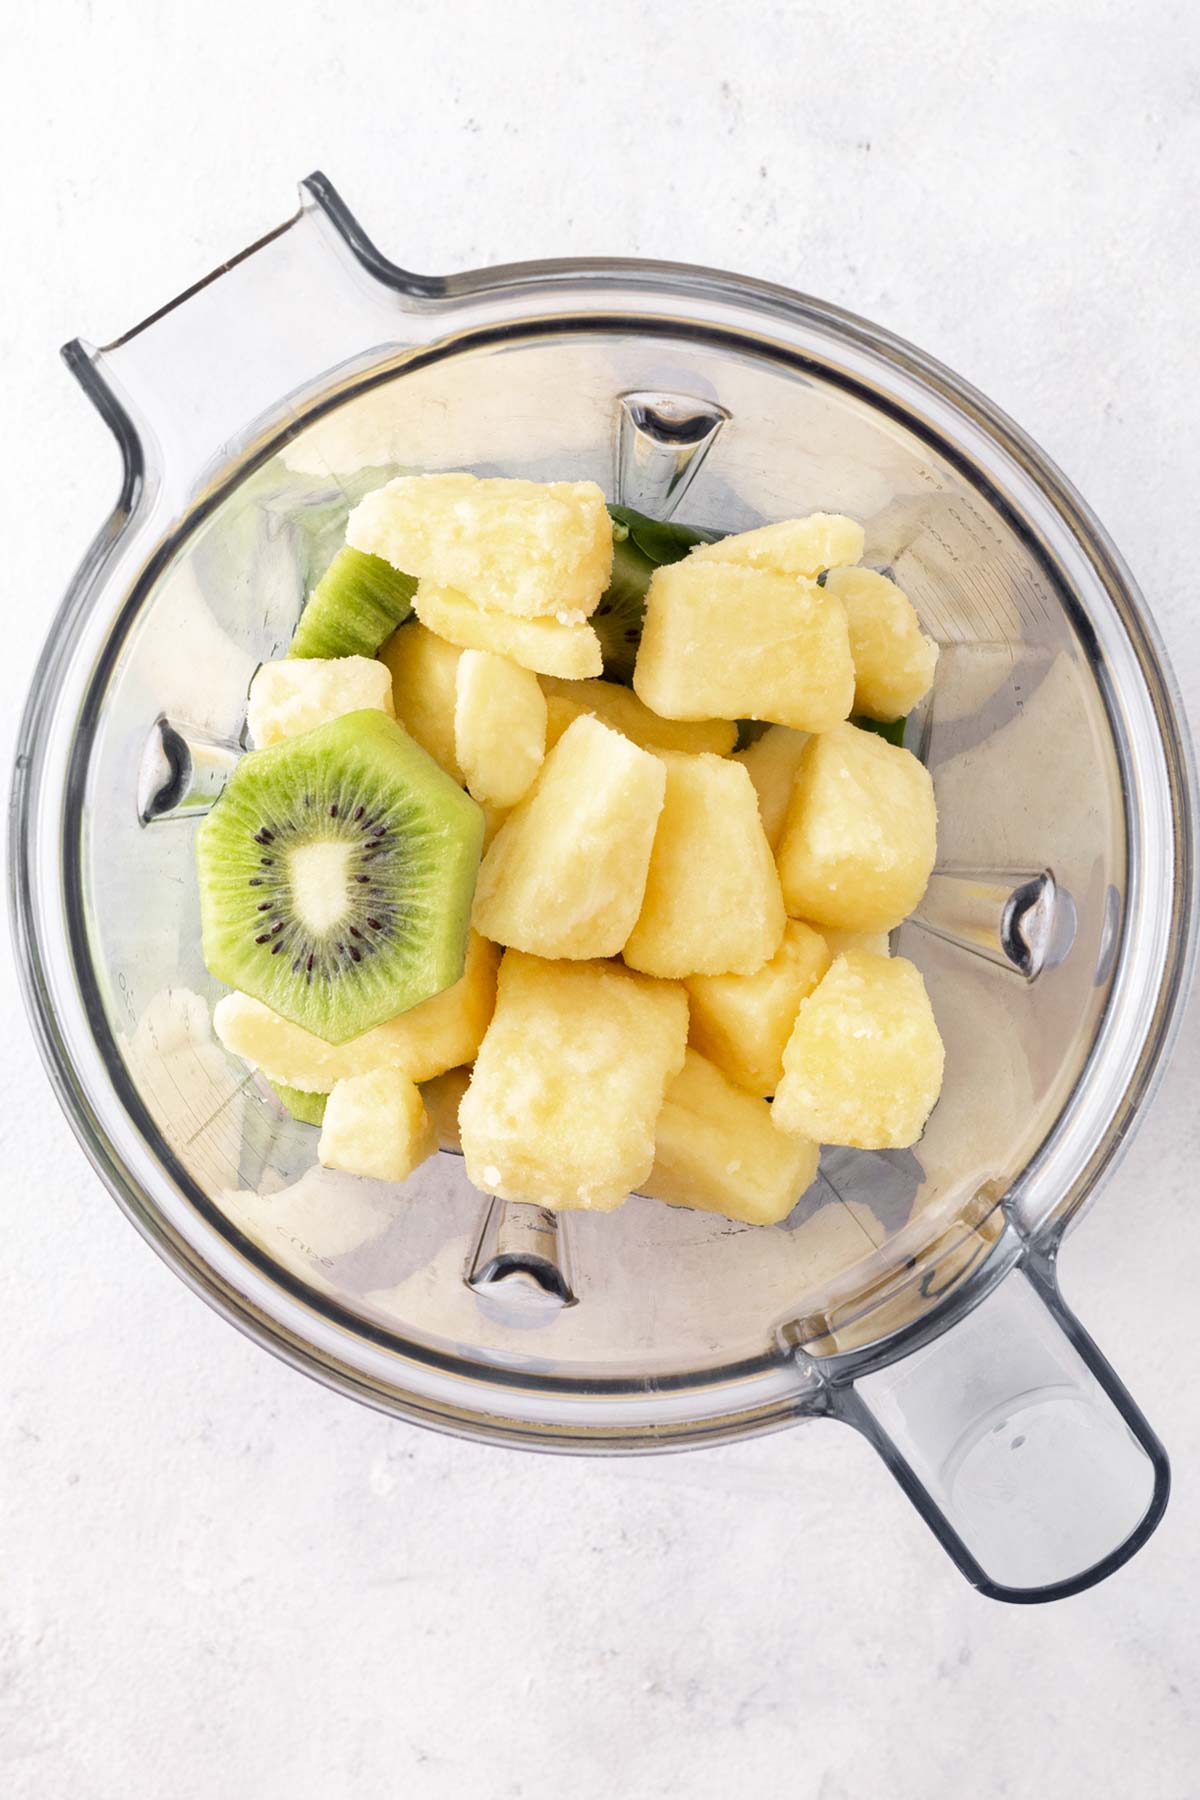 Ingredients for a kiwi smoothie in a blender.